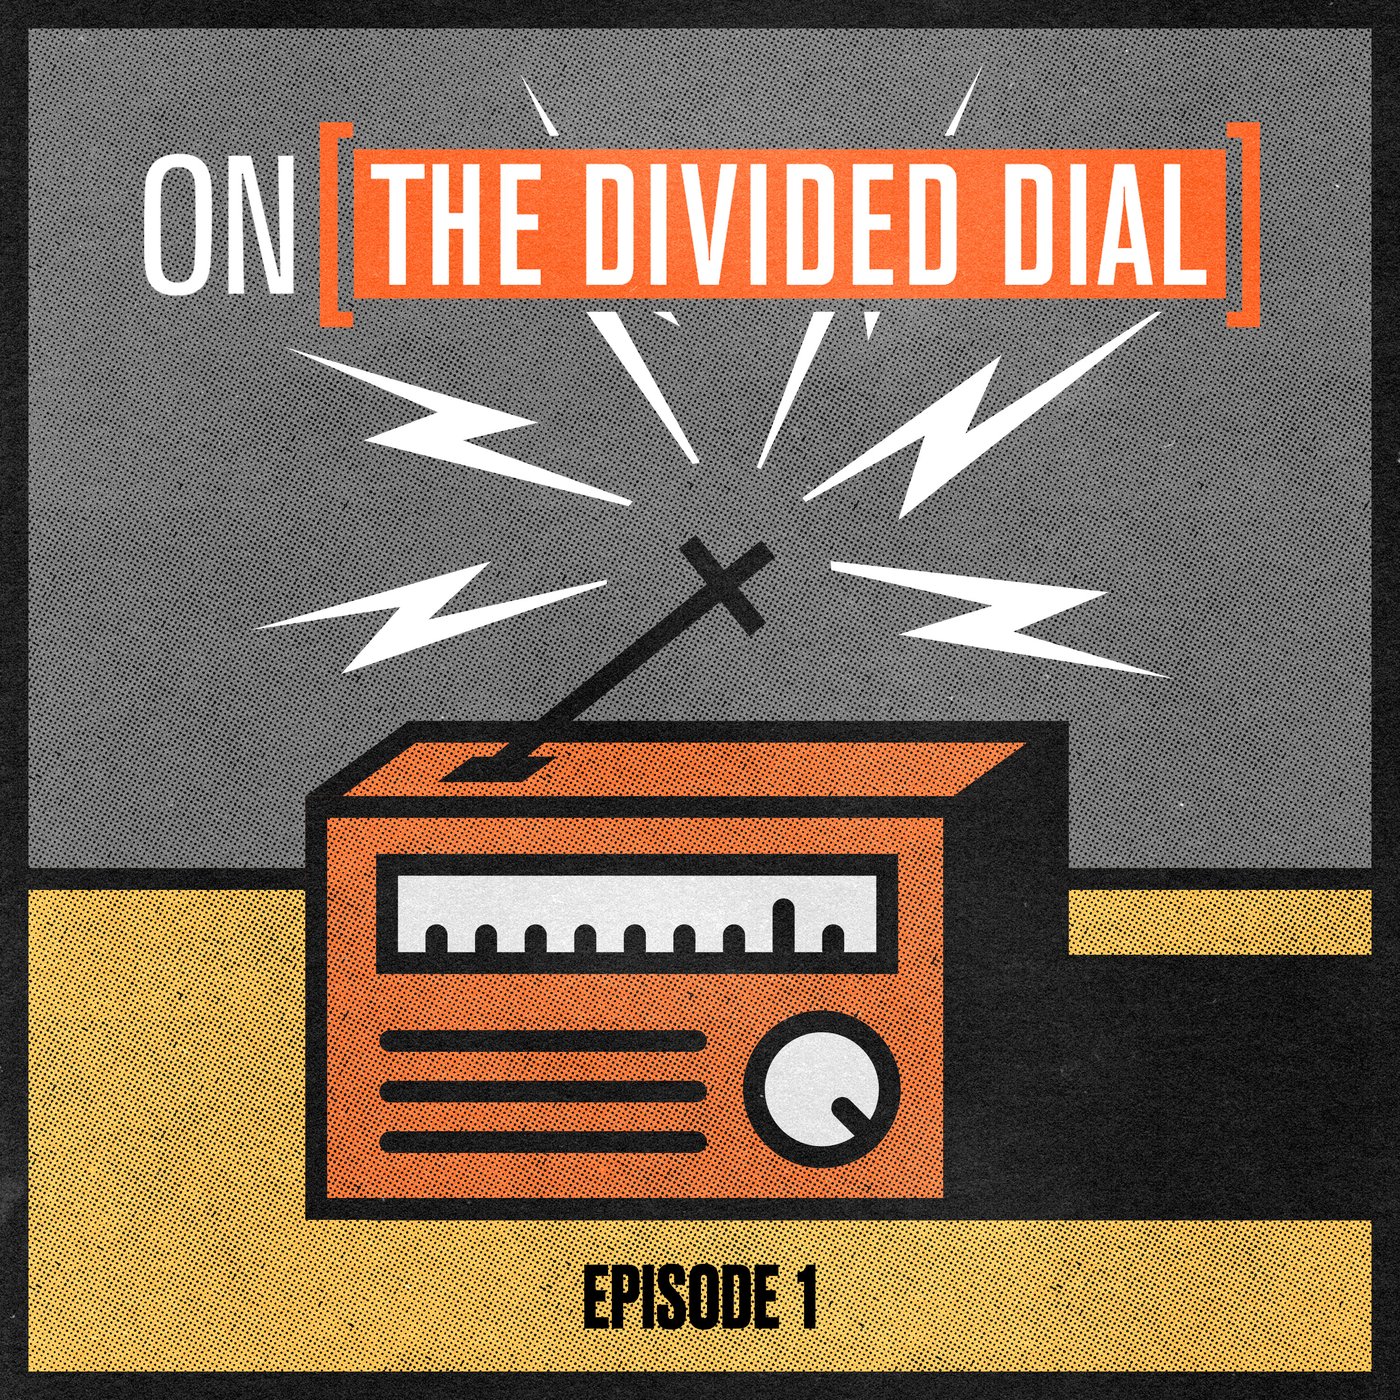 Episode 1 - The Divided Dial